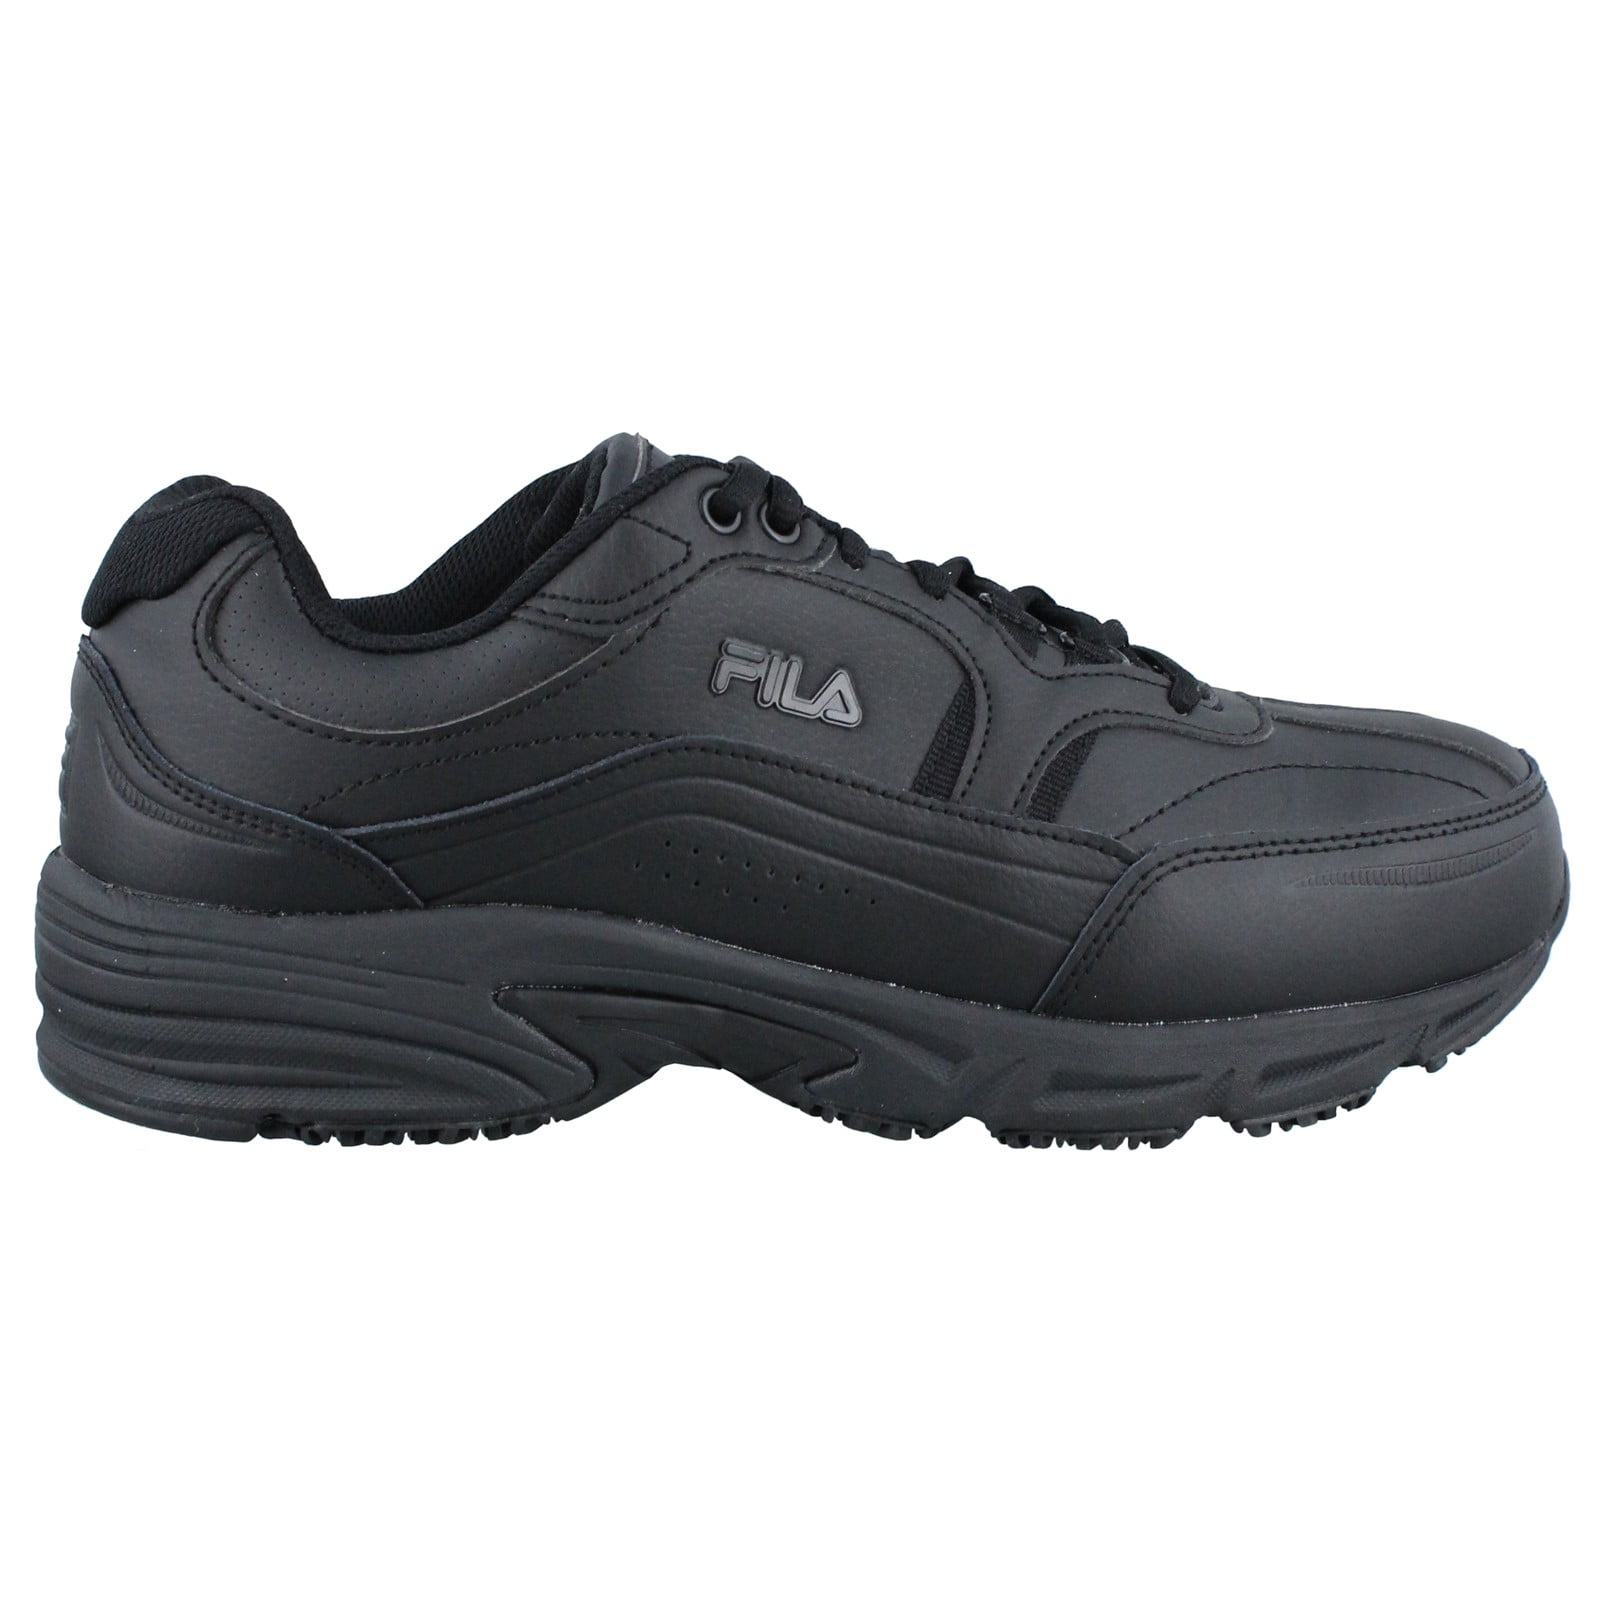 mens wide width work shoes